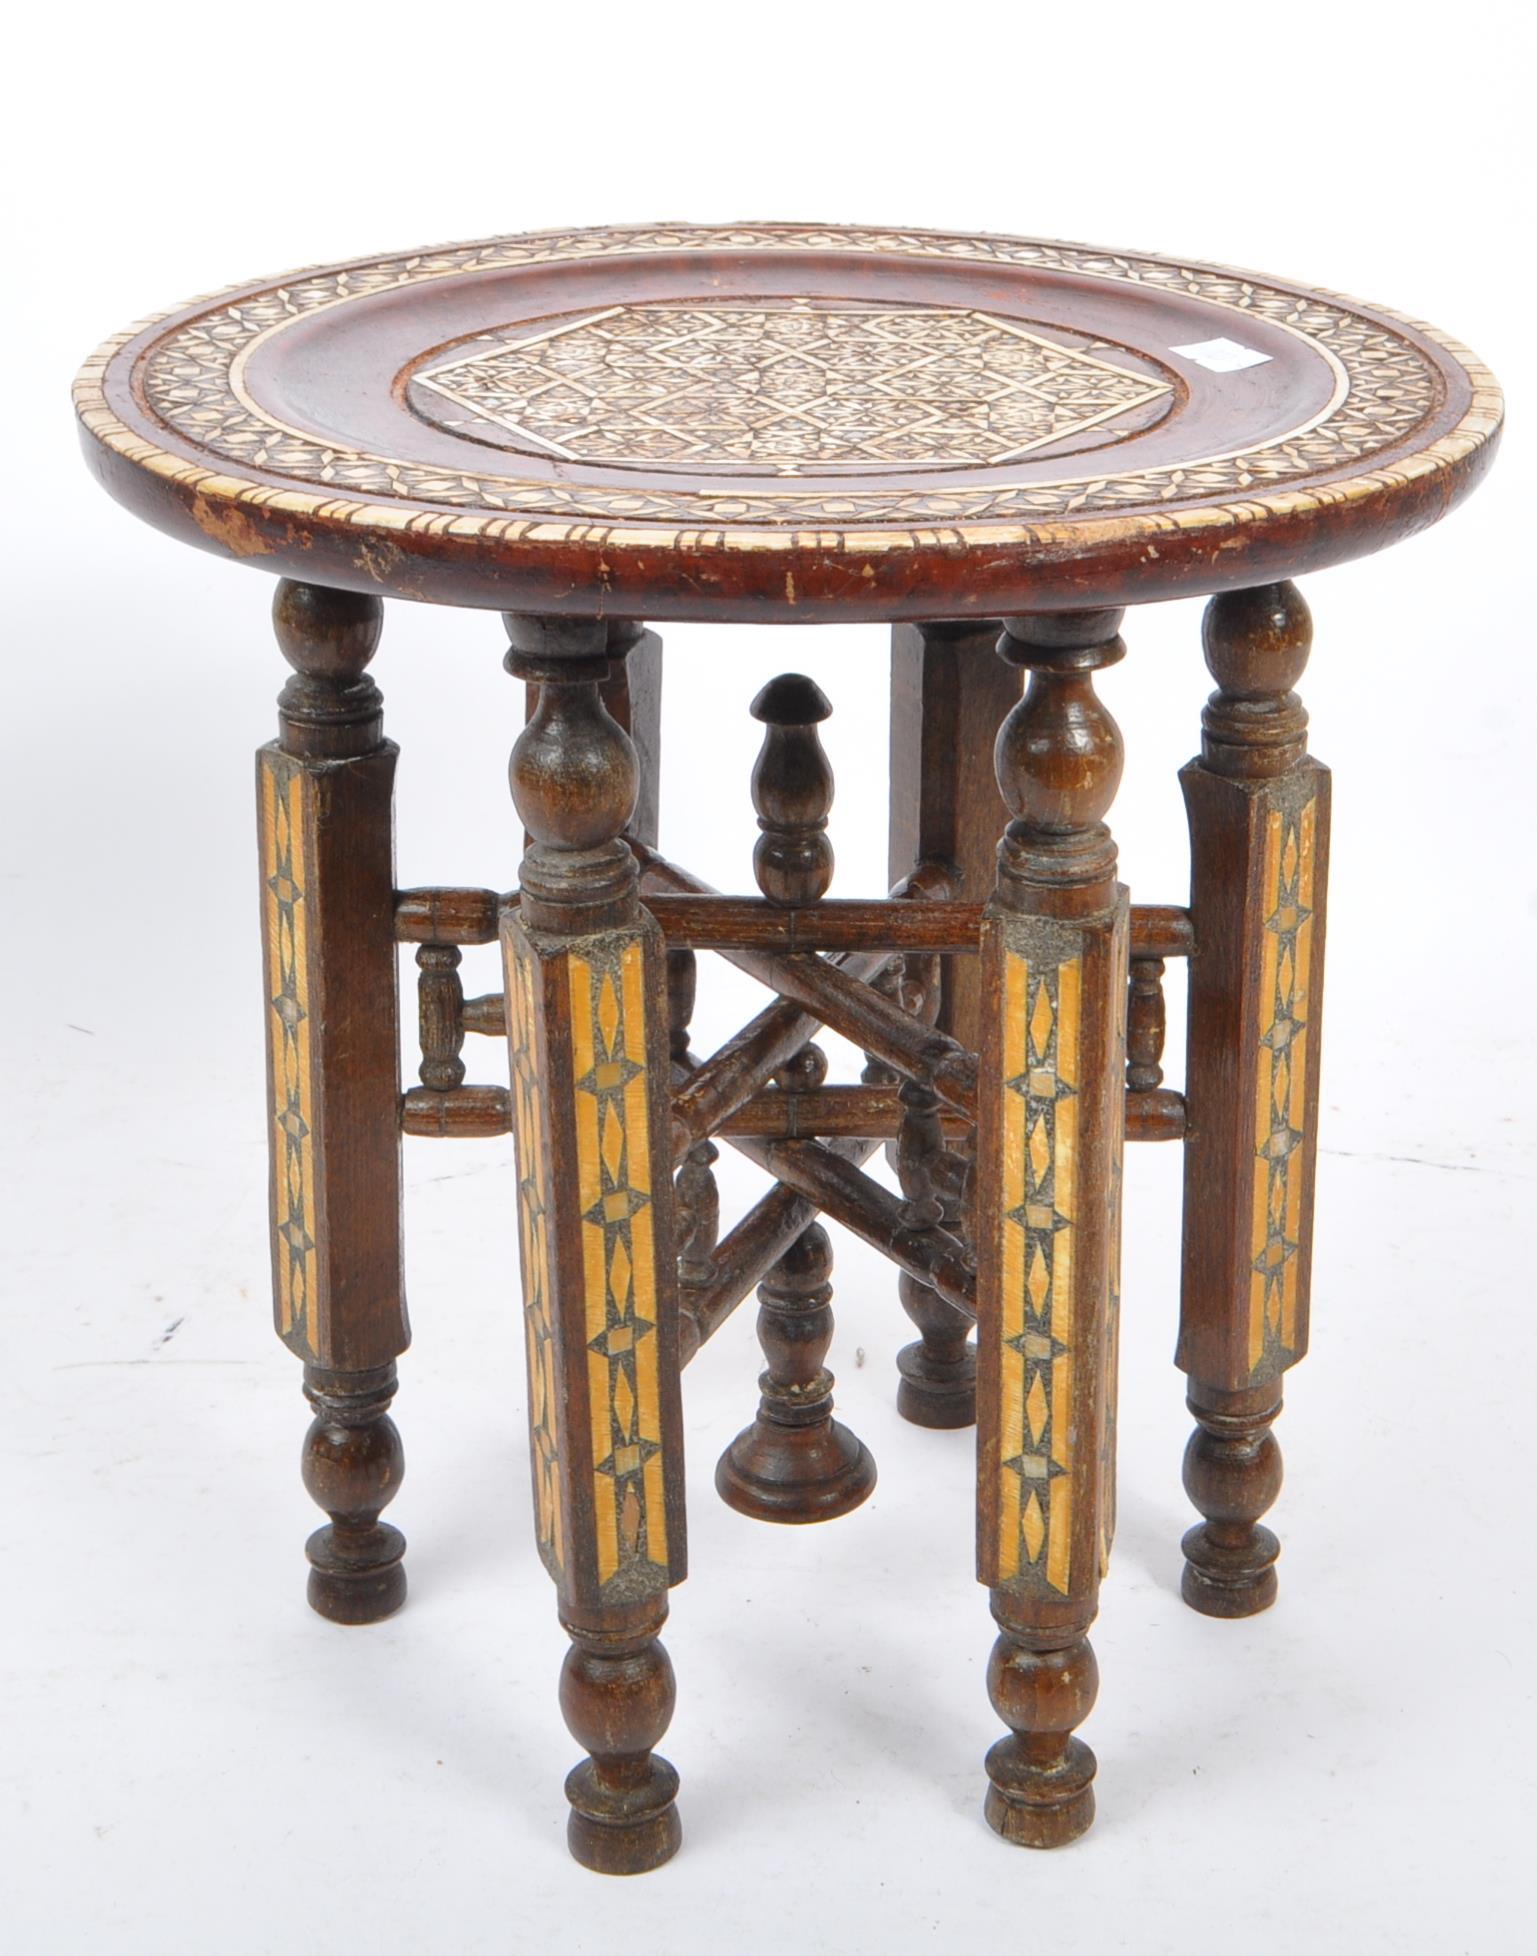 VINTAGE 20TH CENTURY SMALL PROPORTION INDIAN BENARES TABLE - Image 5 of 5